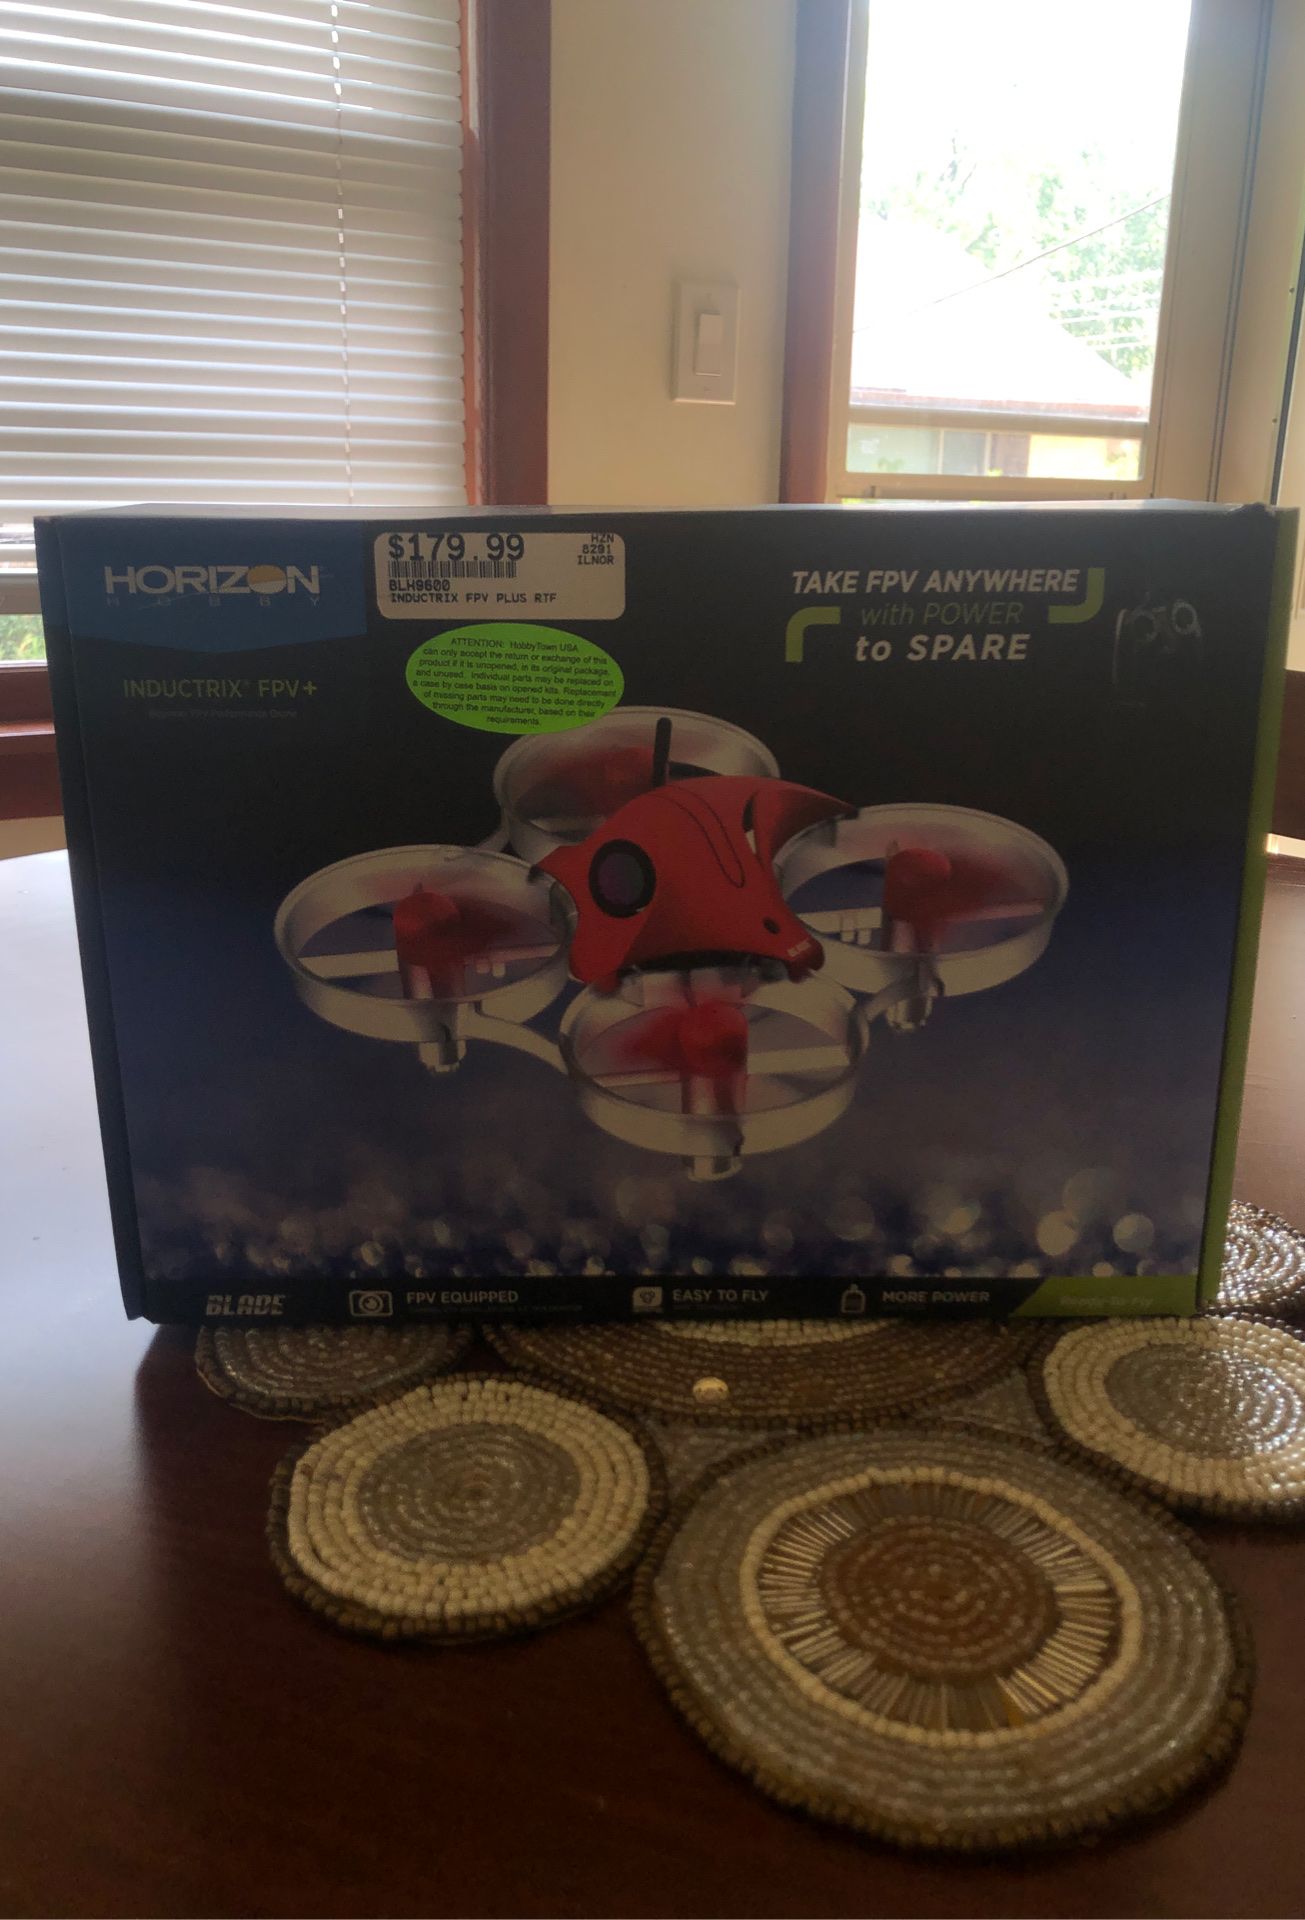 Horizon inductrix FPV+ blade camera drone. Willing to negotiate